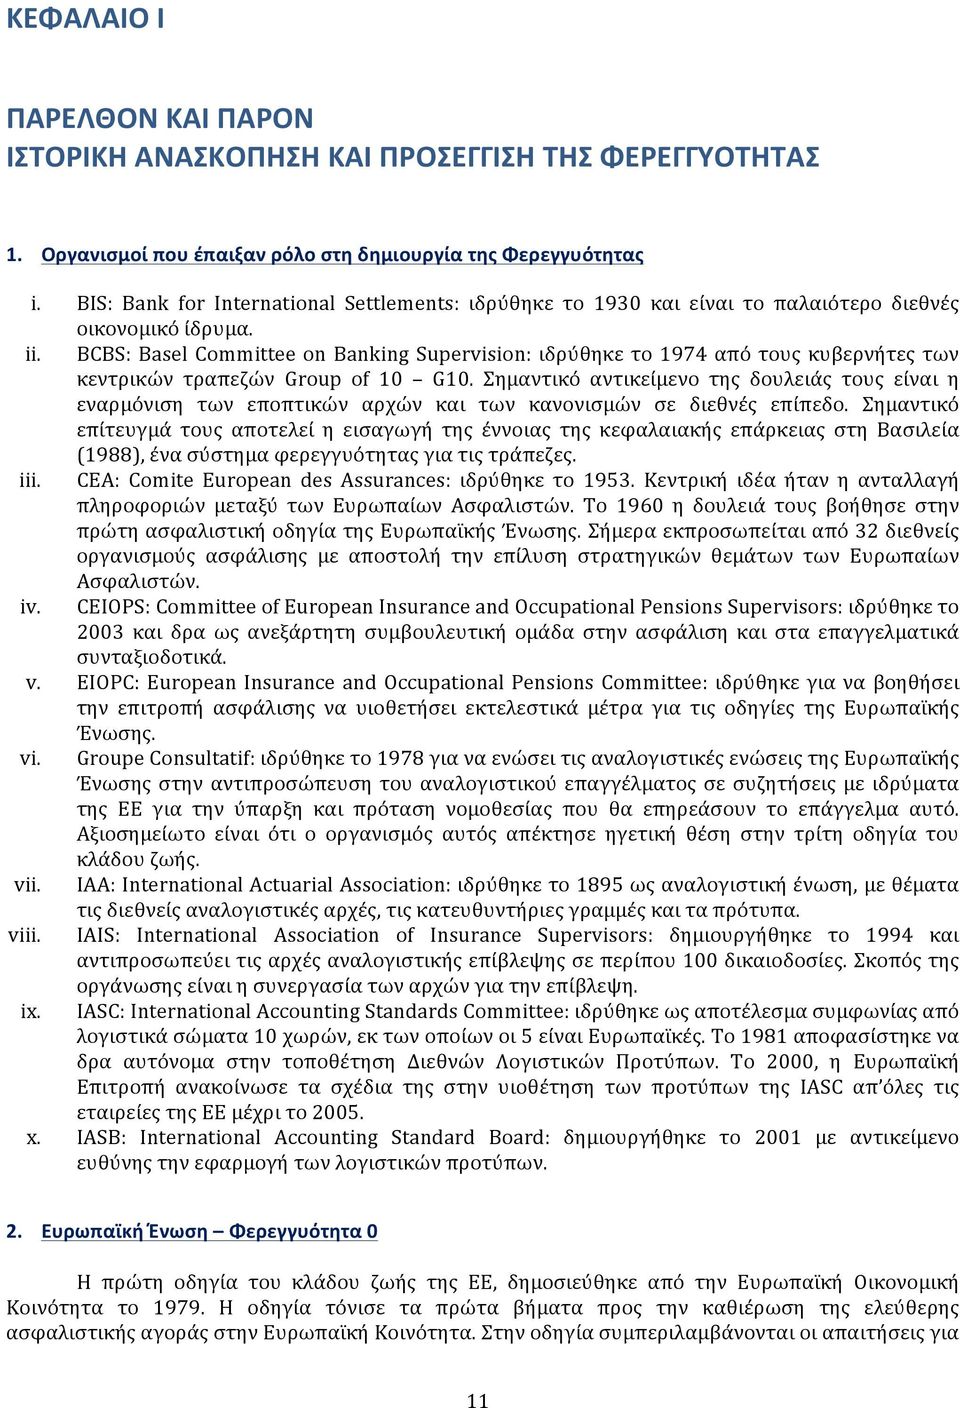 BCBS: Basel Committee on Banking Supervision: ιδρύθηκε το 1974 από τους κυβερνήτες των κεντρικών τραπεζών Group of 10 G10.